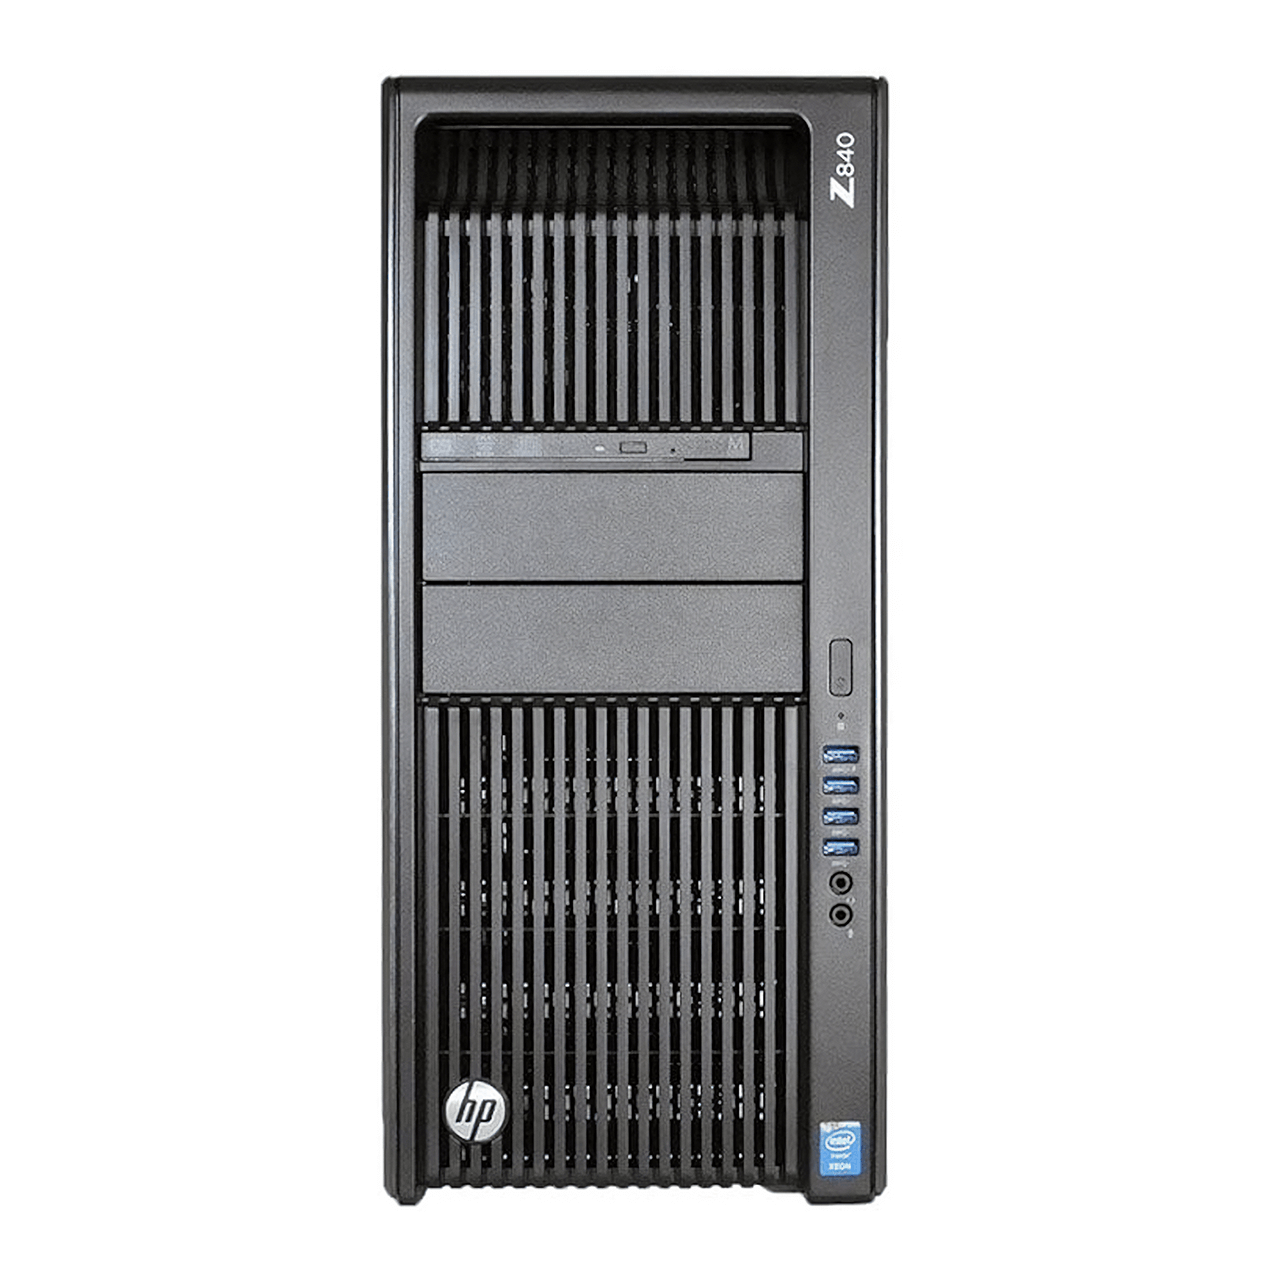 Build Your Own - Custom HP Z840 Workstation (2 Processors)